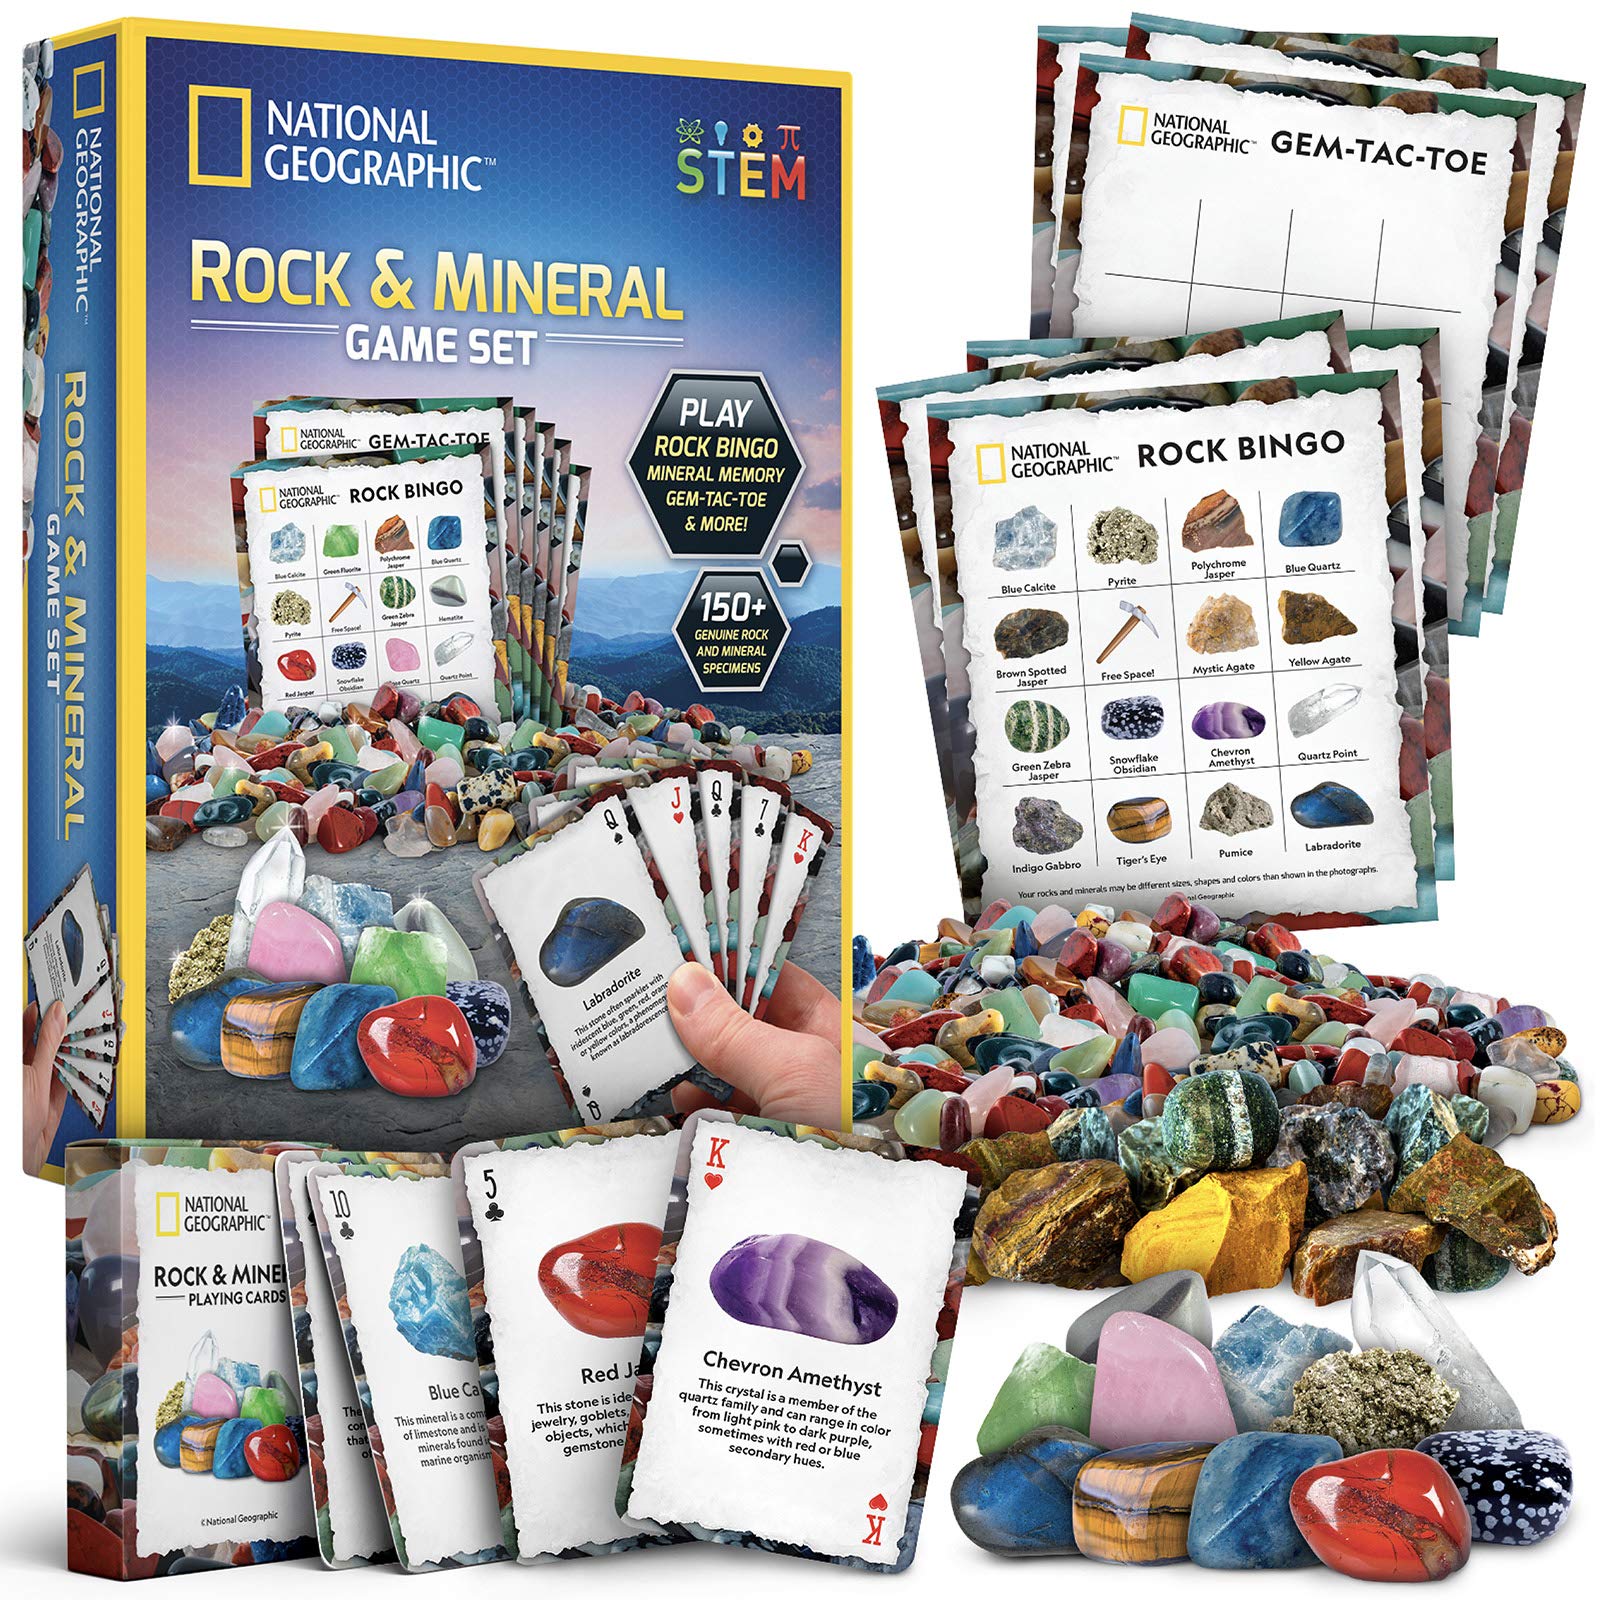 NATIONAL GEOGRAPHIC Rock Bingo Game -Play Rock Bingo, Mineral Memory, Gemstone Trivia, & Your Favorite Card Games, Collection Includes Over 150 Rocks and Minerals, Great Educational STEM Toys for Kids